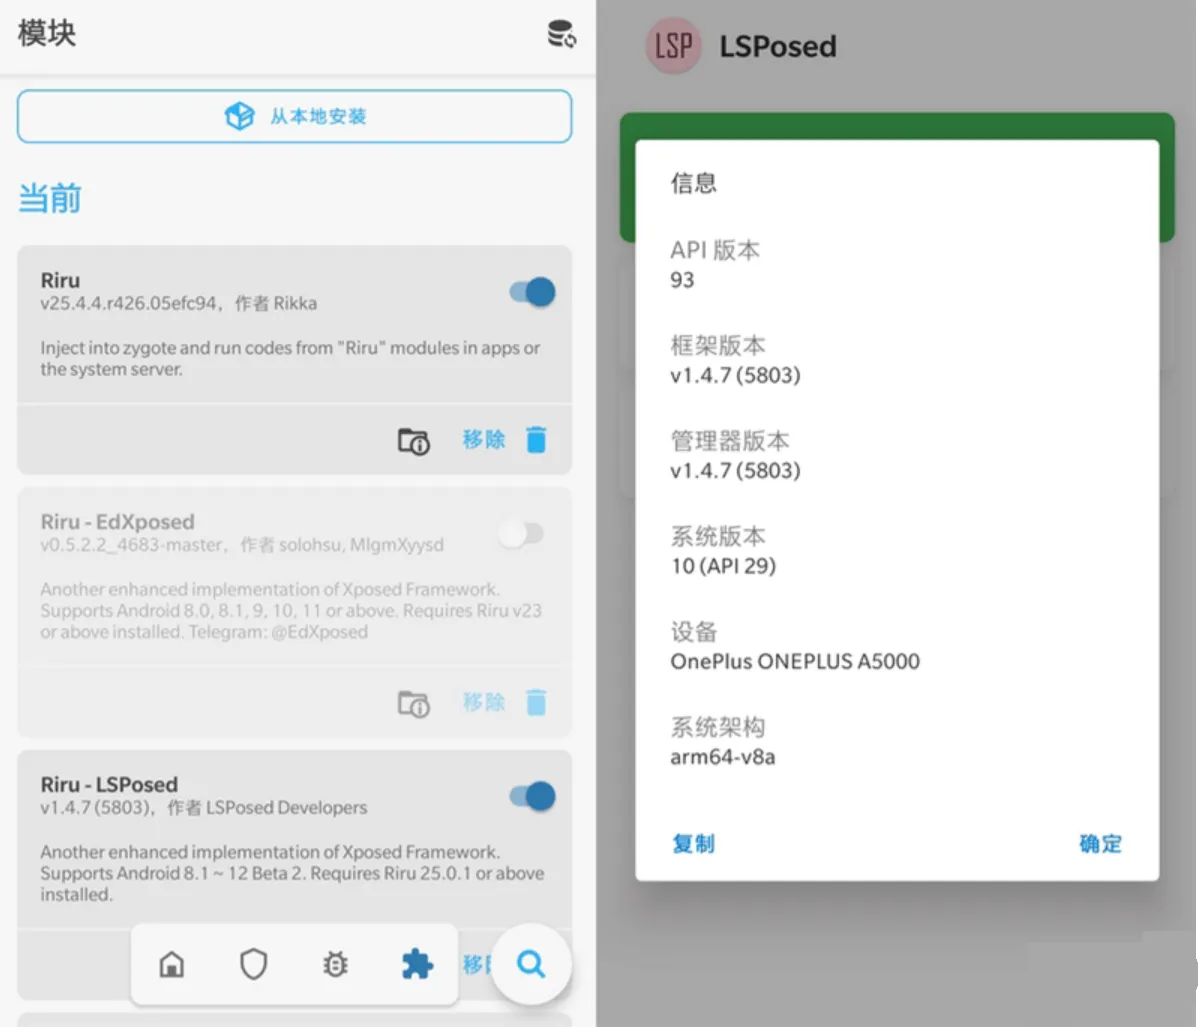 Xposed框架 LSPosed_1.8.4 支持Android13